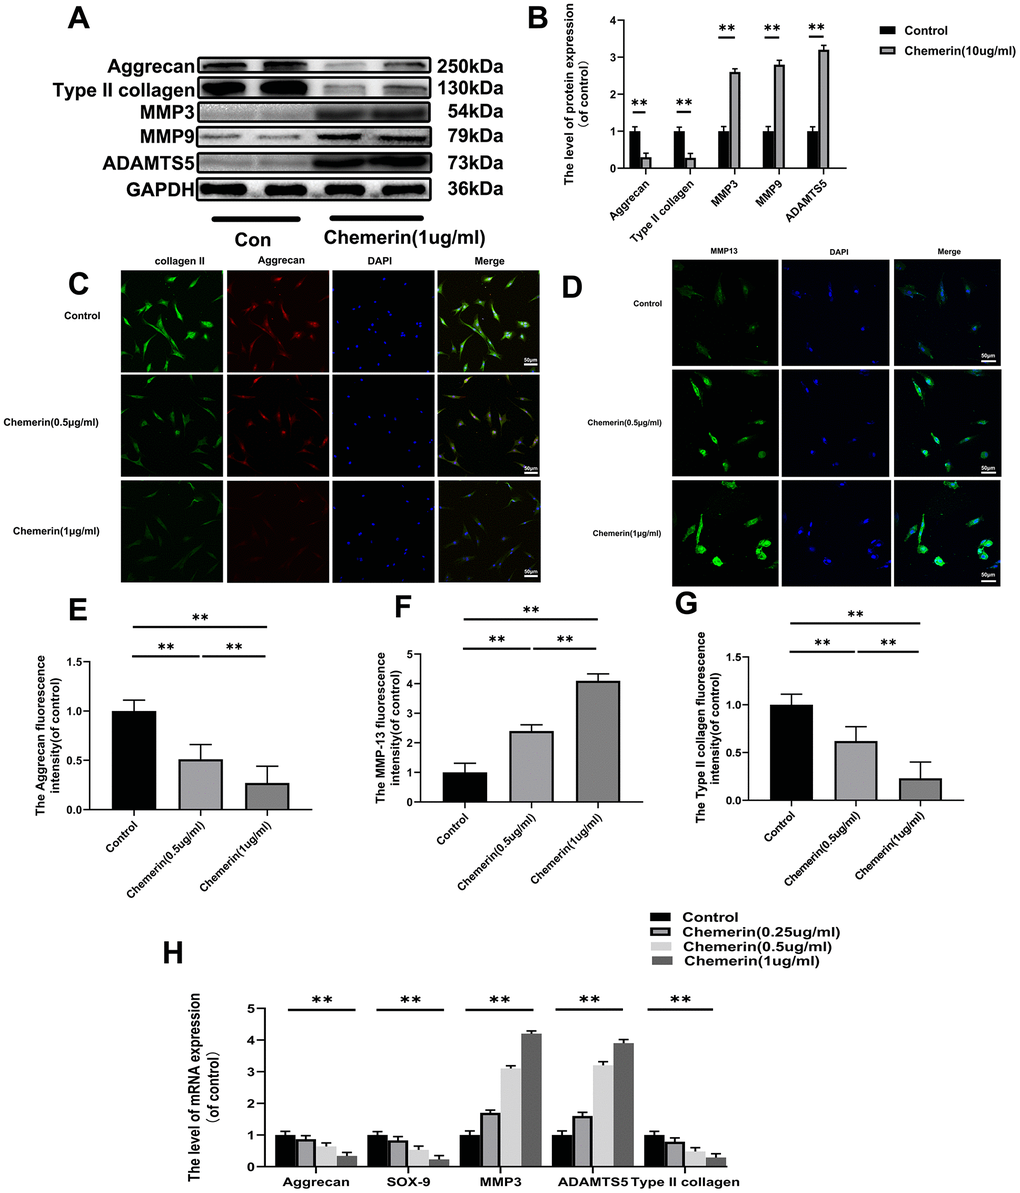 Effect of chemerin on anabolism, and catabolism of ECM in human NPCs. (A) The expression levels of aggrecan, collagen II, MMP3, MMP9, and ADAMTS5 were visualized by western blotting. (B) Quantification of Aggrecan, collagen II, MMP3, MMP9, and ADAMTS5 immunoblots. (C, D) The expression levels of collagen II, aggrecan, and MMP-13B were observed by immunofluorescence, and (E–G) the fluorescence intensity analyzed using Image J. (H) The mRNA expression levels of aggrecan, SOX-9, MMP3, ADAMTS5, and collagen II in NPCs were evaluated by RT-PCR. Data are represented as mean ± SEM of three independent experiments, each done in triplicate. Significant differences between groups are indicated as **p 